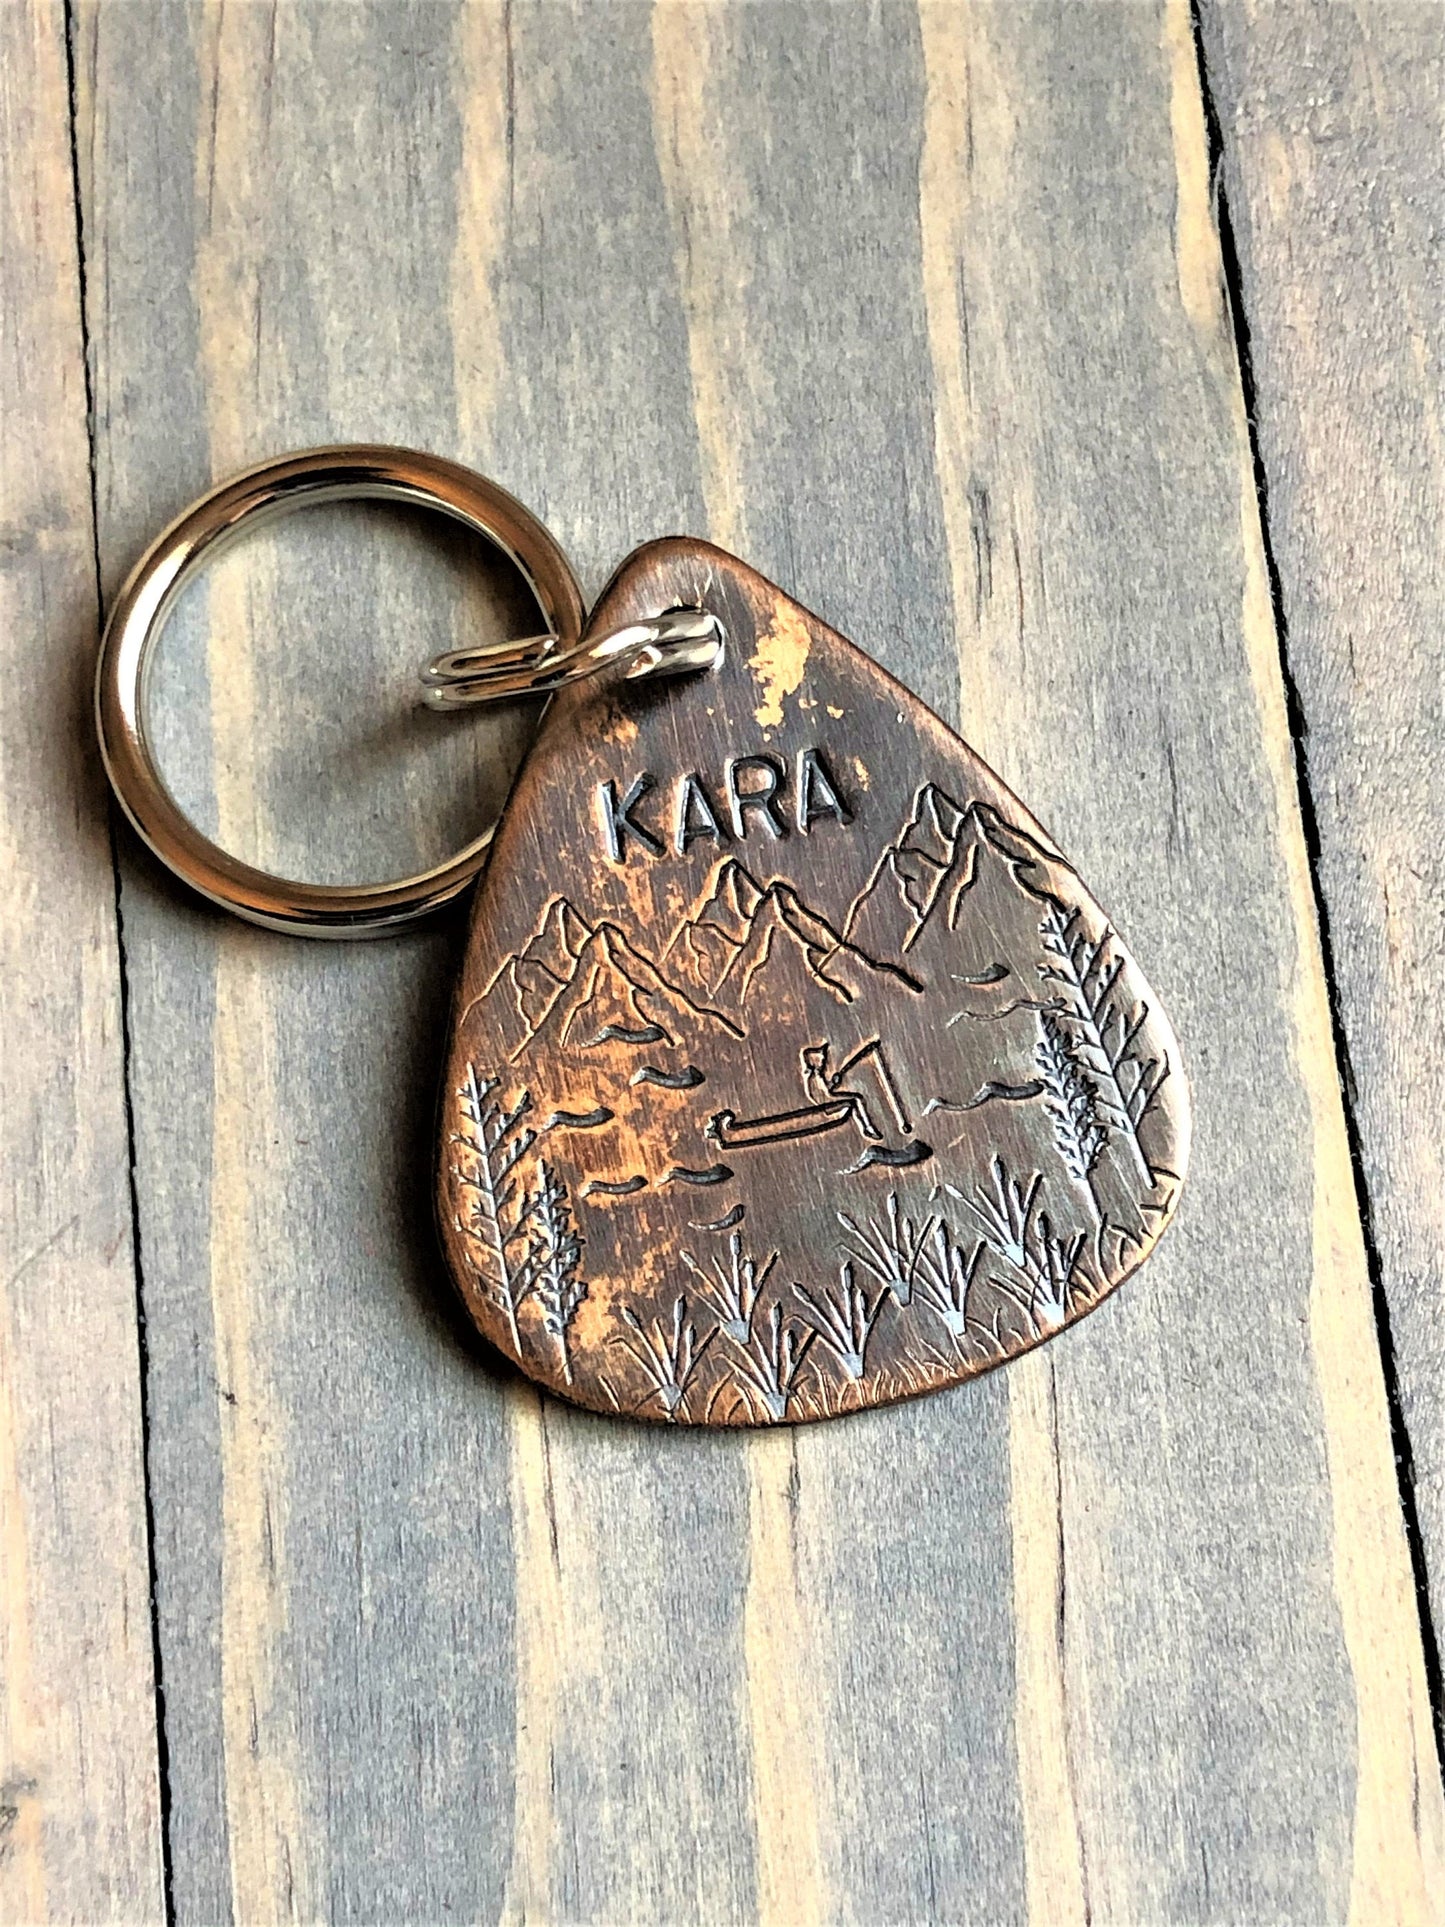 Custom Guitar Pick Dog Tag, Hand Stamped Pet ID, Personalized Dog Tag for Dog, Fishing Scene Dog Tag, Dog ID Tag with Boat